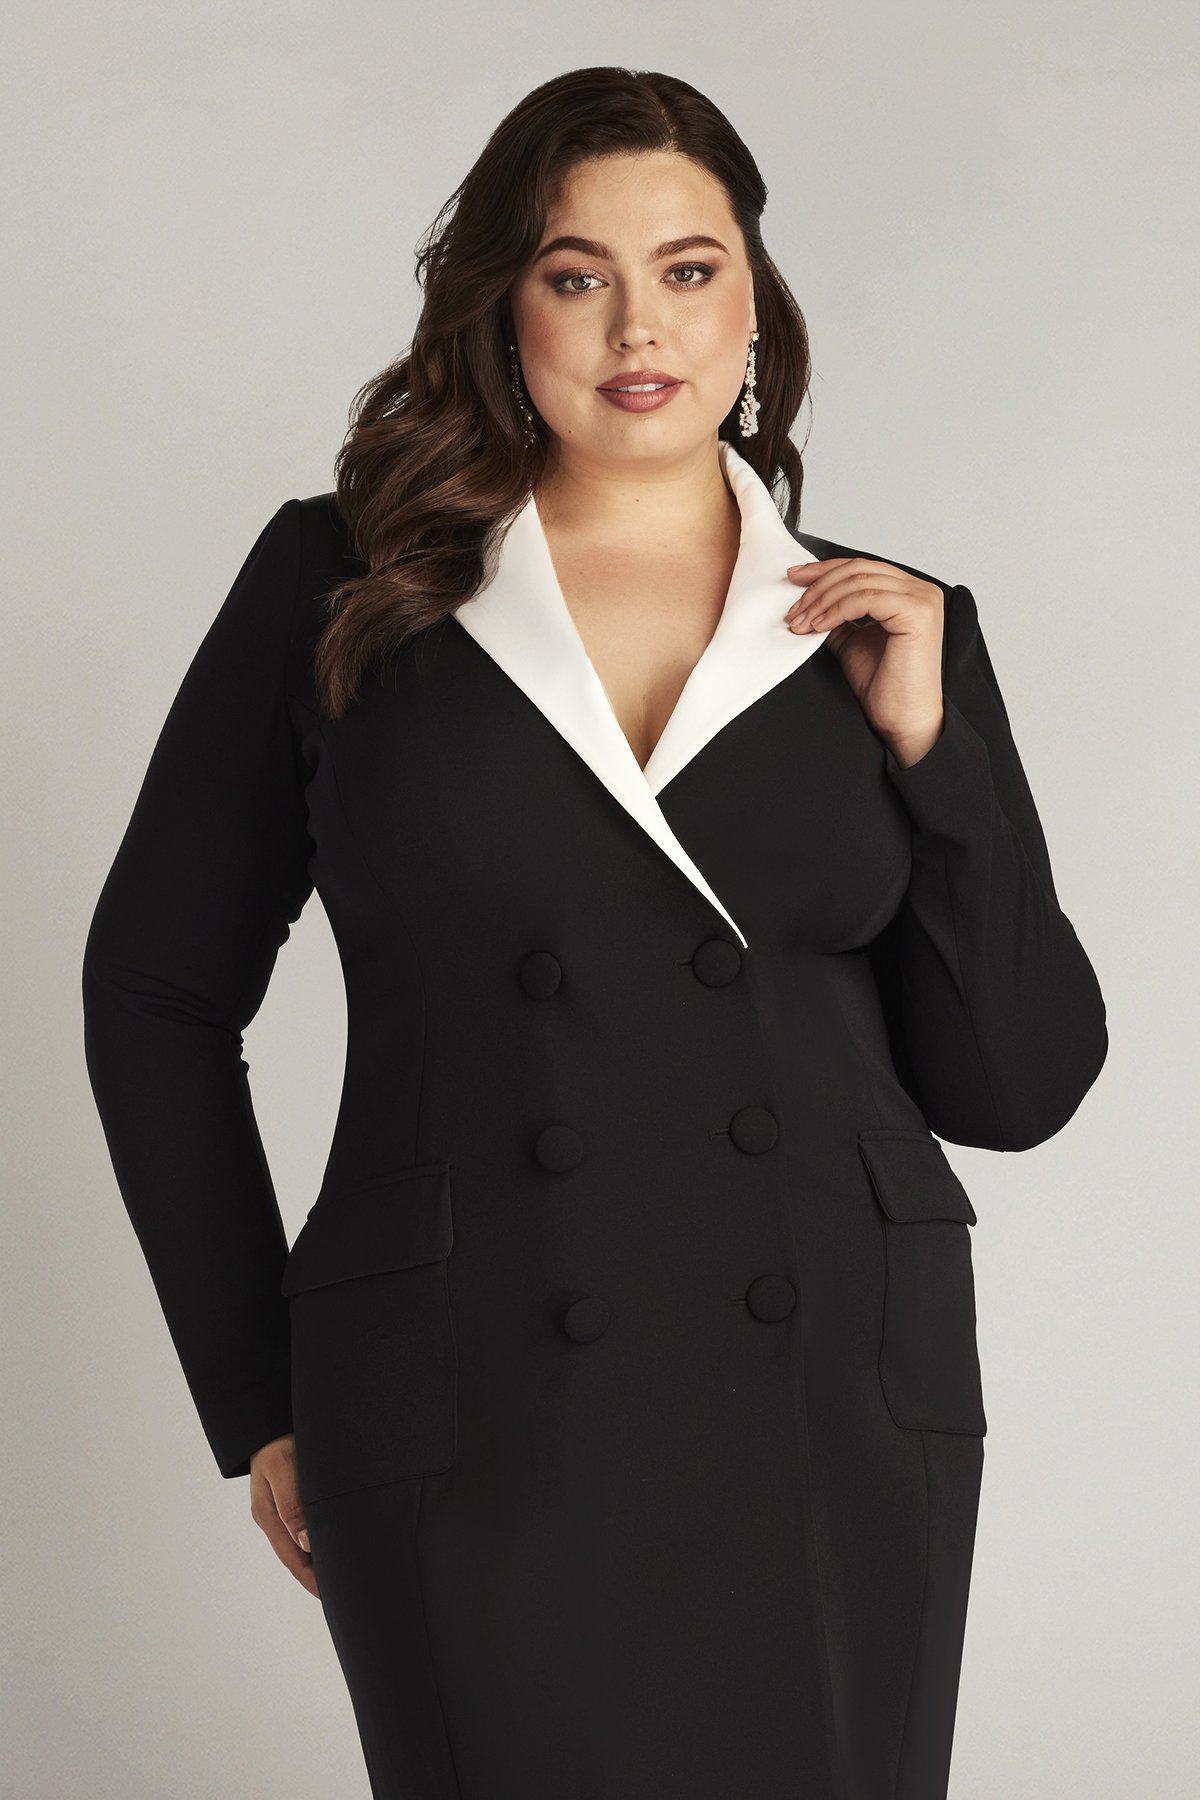 McKay Double-Breasted Coat Dress - PLUS SIZE